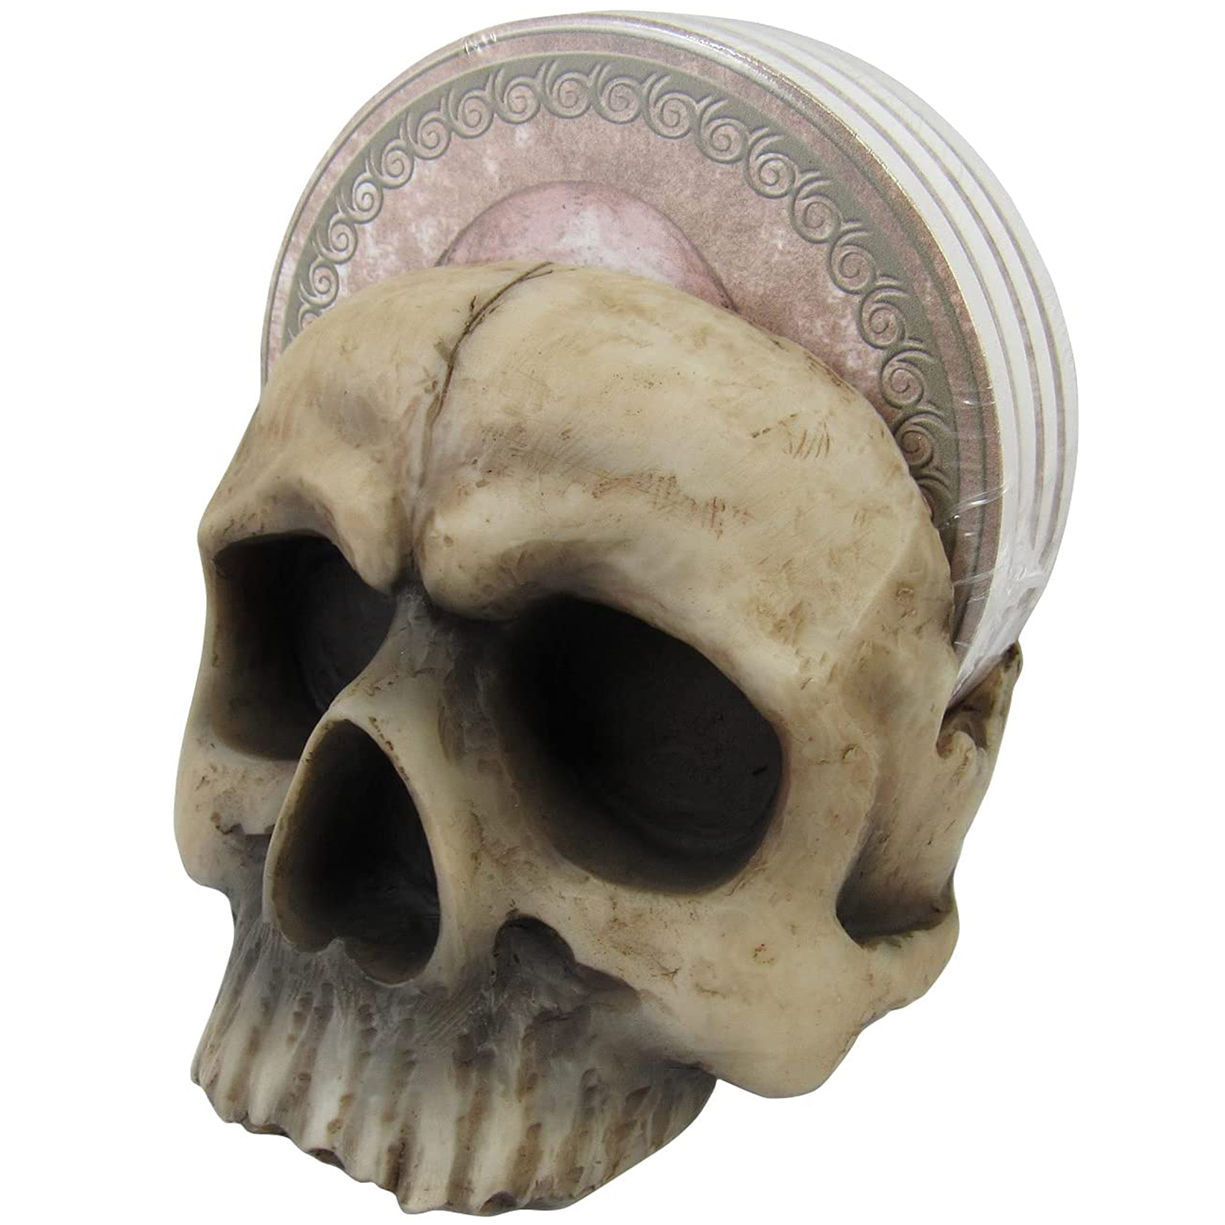 Pick Your Poison Skull Coaster Set includes 4 moisture-absorbent coasters that fit in a polyresin textured skull 